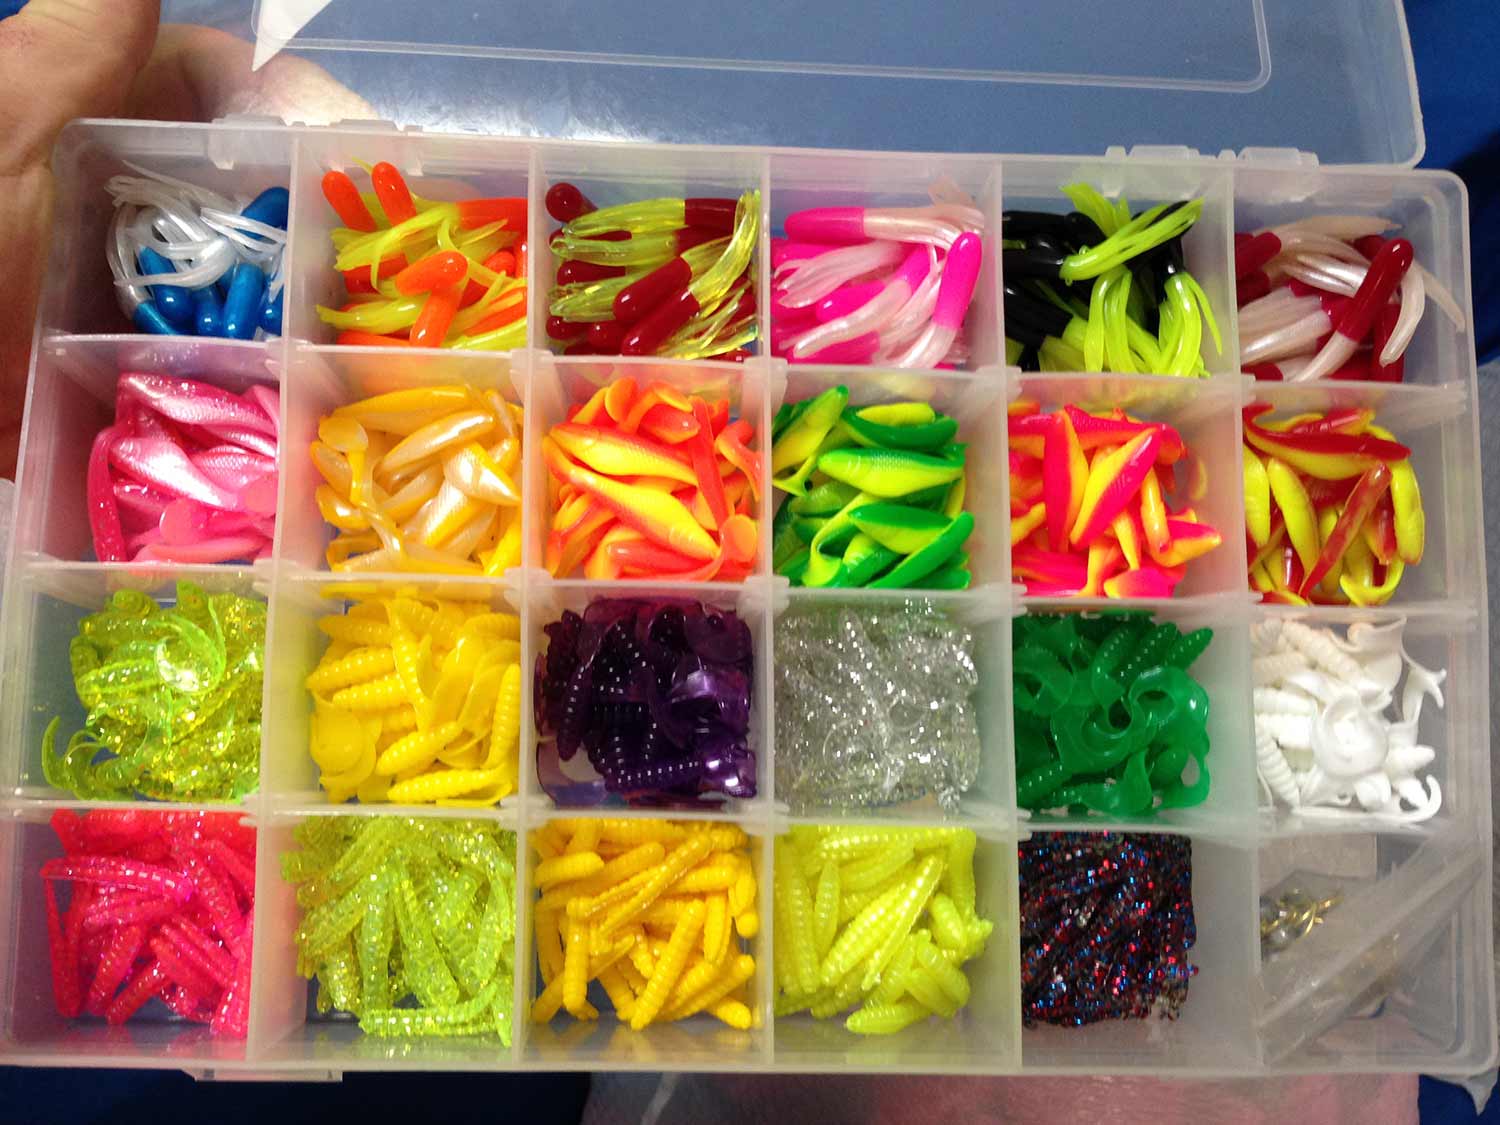 Crappie jigs come in a variety of colors.